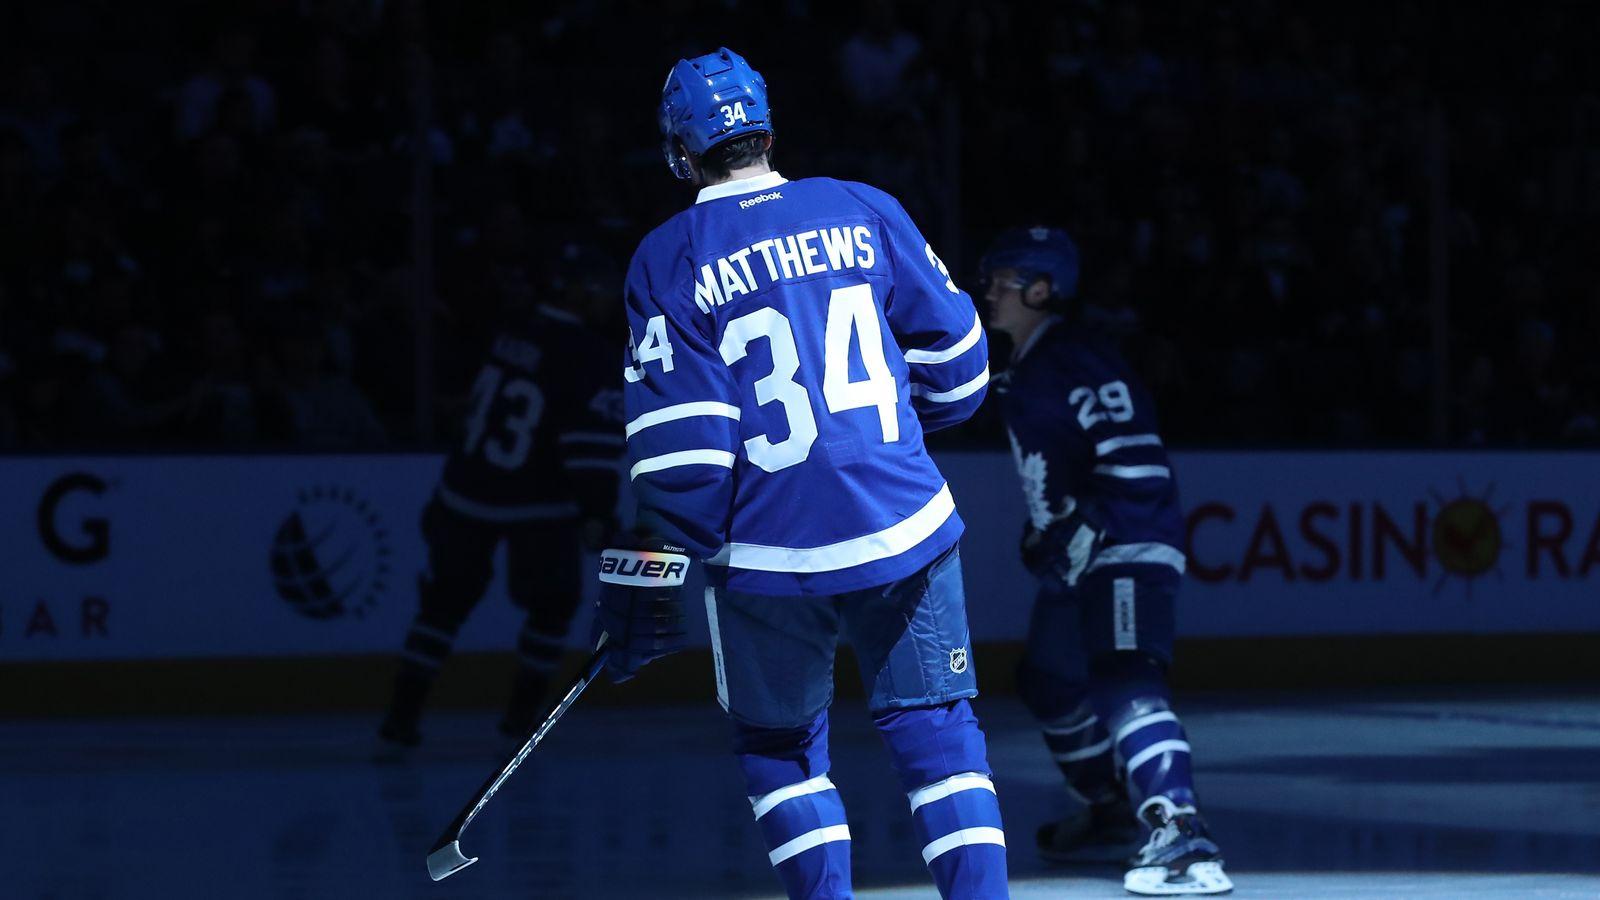 Auston Matthews Already Has The Best Selling Jersey In The NHL